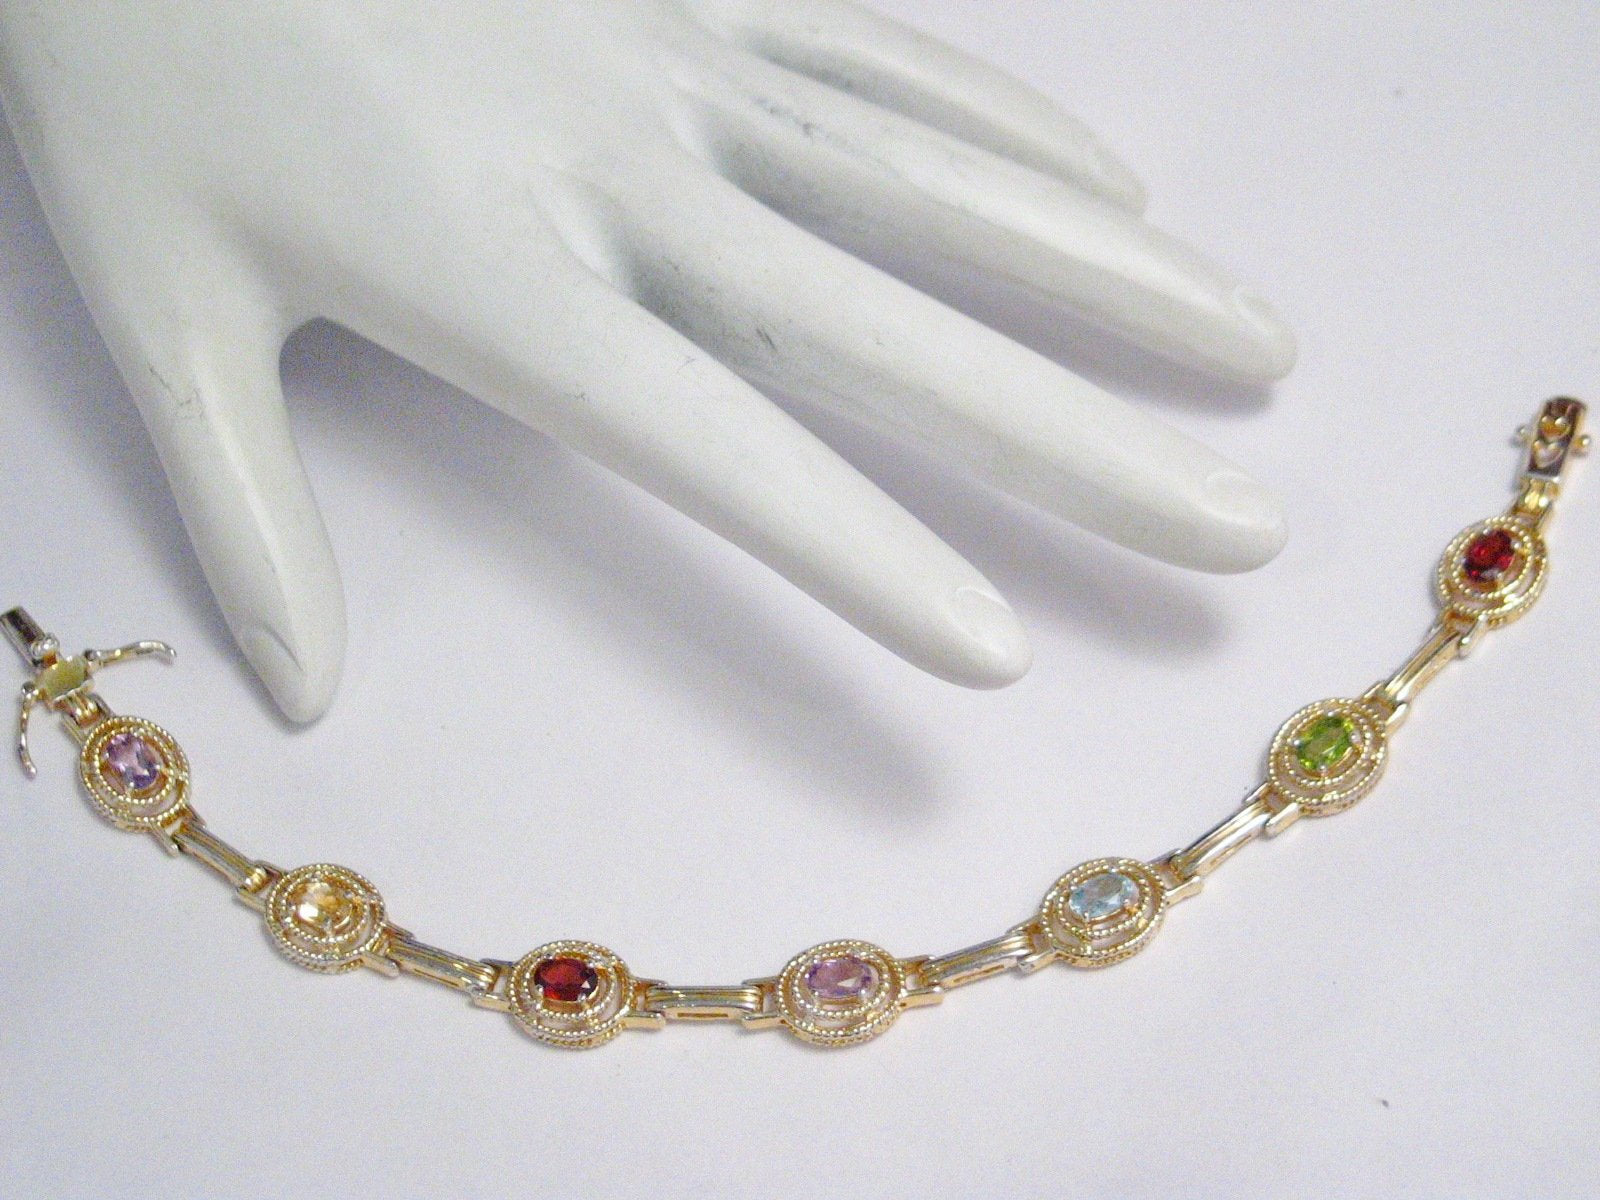 Bracelet womens genuine sterling silver and gemstone  7.5" | Pre-owned Jewelry